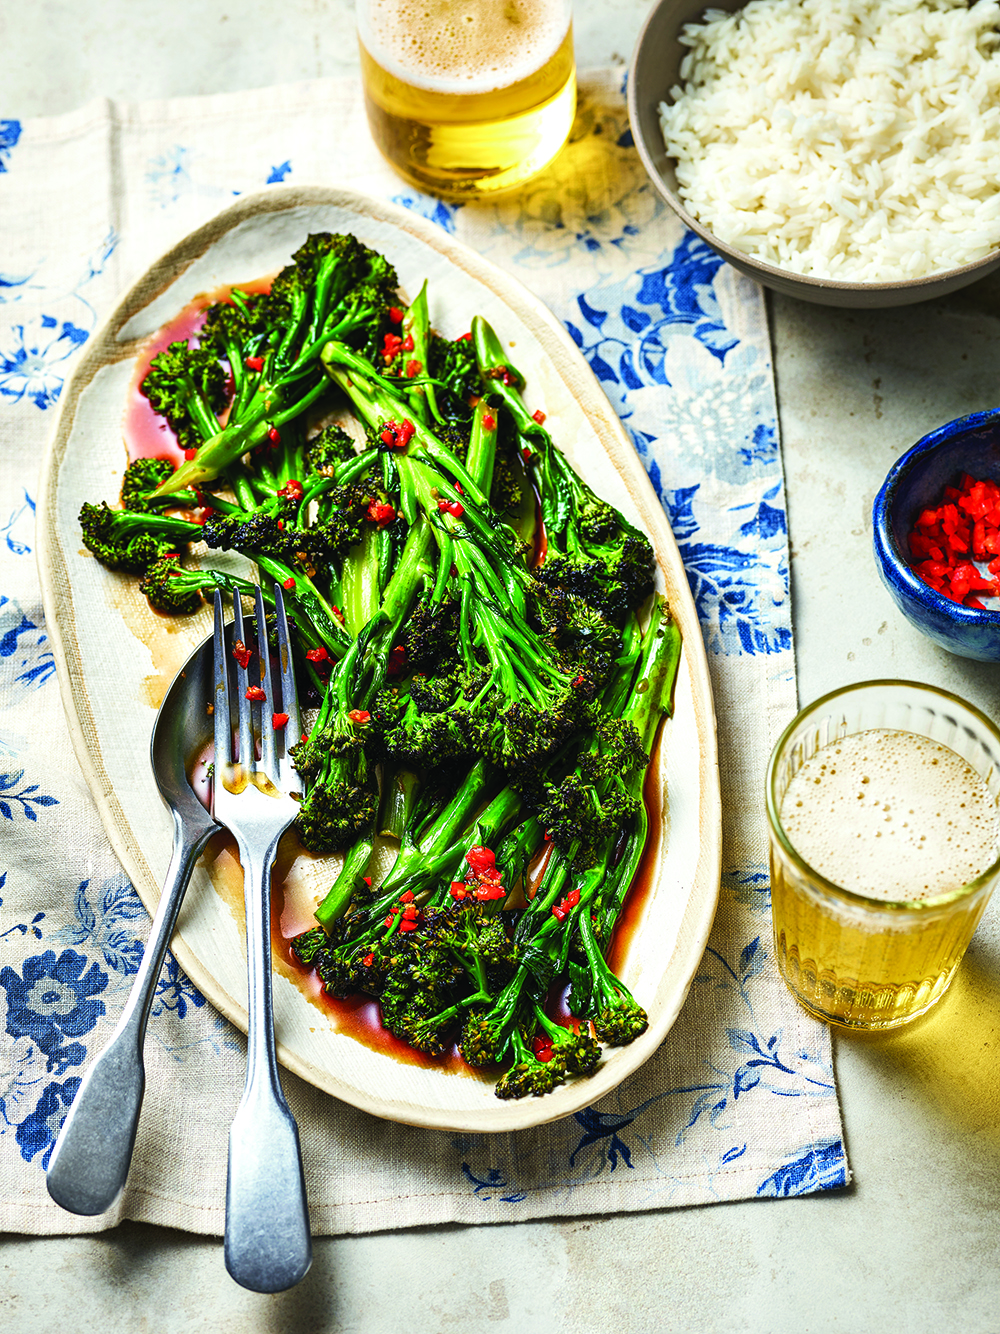 purple sprouting broccoli in oyster sauce